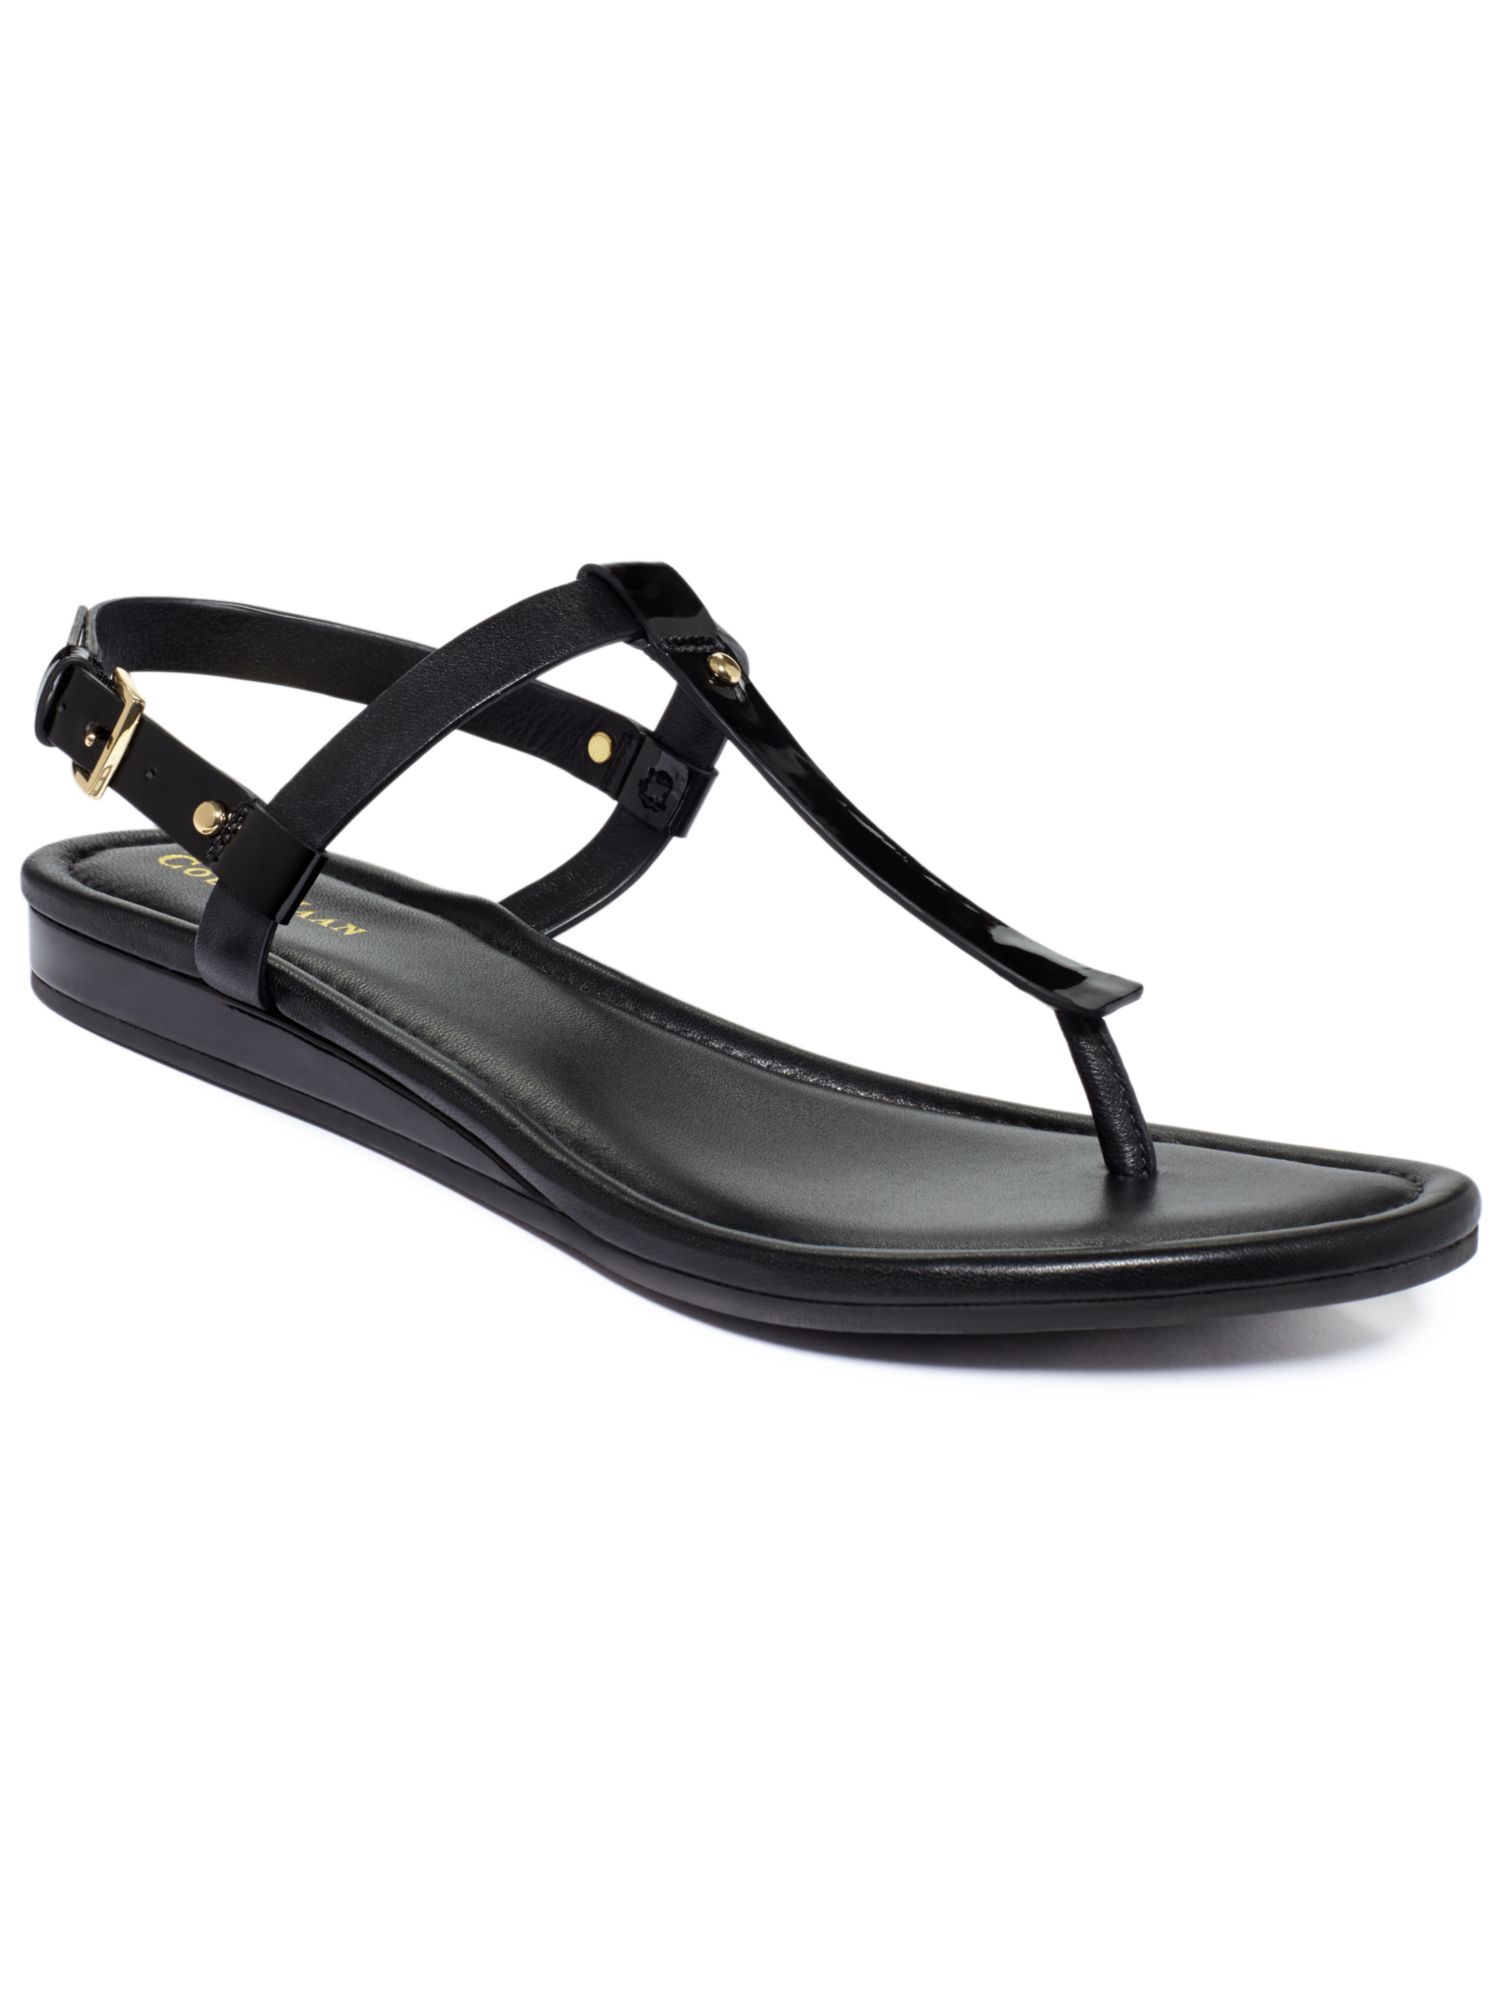 COLE HAAN Womens Black Studded Comfort Boardwalk Round Toe Wedge Buckle Thong Sandals Shoes 7.5 B